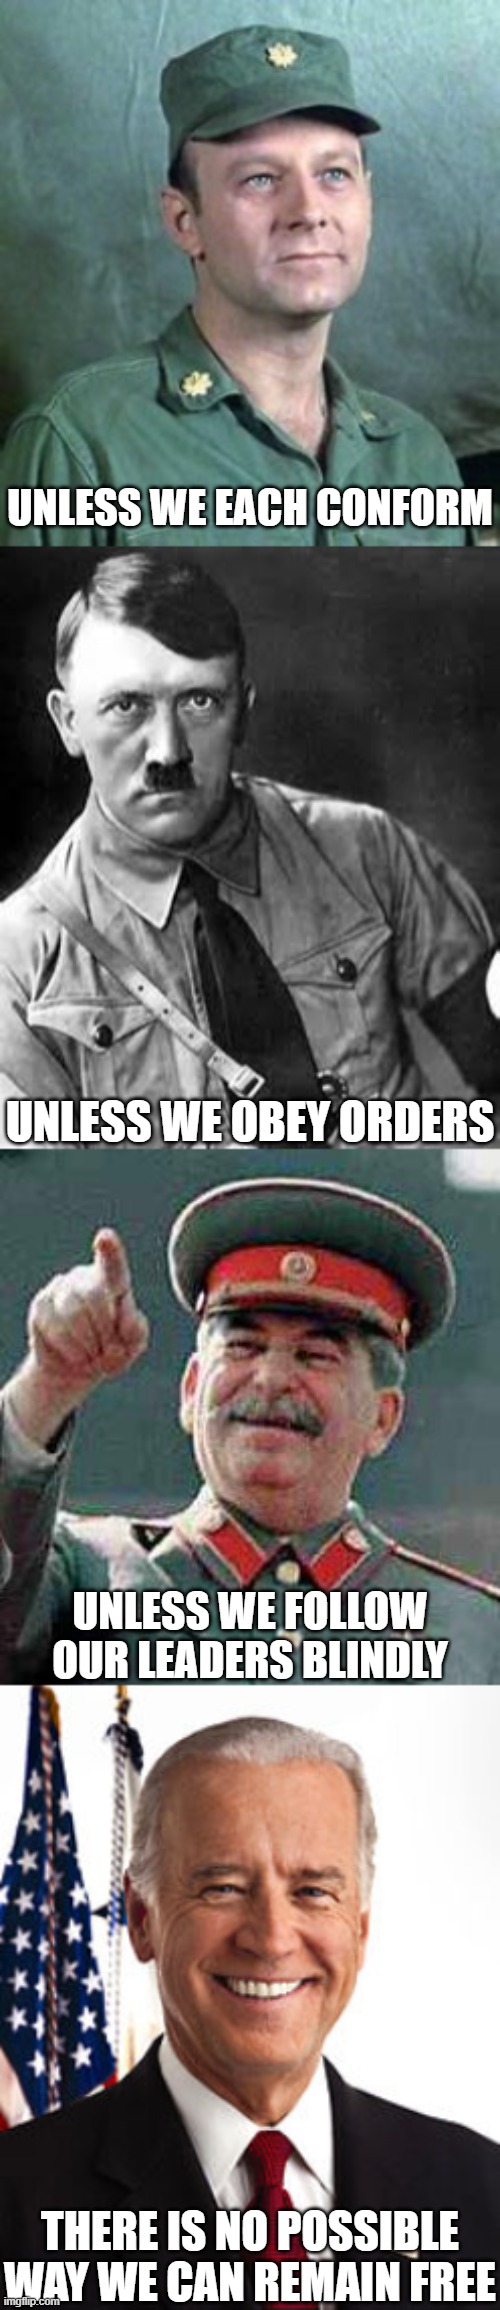 Frank Burns' logic | UNLESS WE EACH CONFORM; UNLESS WE OBEY ORDERS; UNLESS WE FOLLOW OUR LEADERS BLINDLY; THERE IS NO POSSIBLE WAY WE CAN REMAIN FREE | image tagged in frank burns,adolf hitler,stalin says,memes,joe biden,mash | made w/ Imgflip meme maker